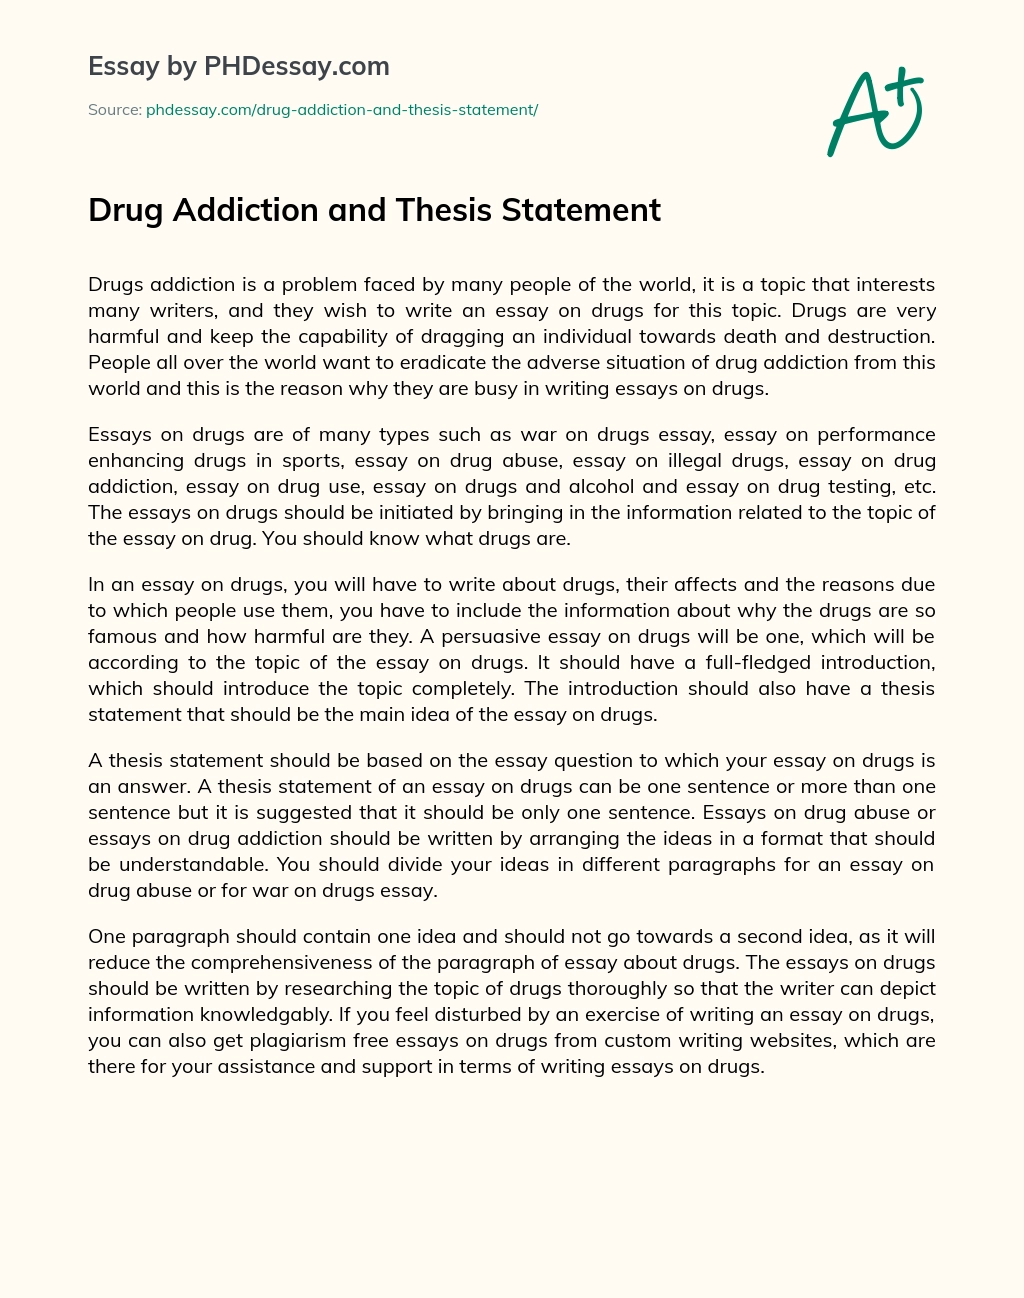 Drug Addiction and Thesis Statement essay